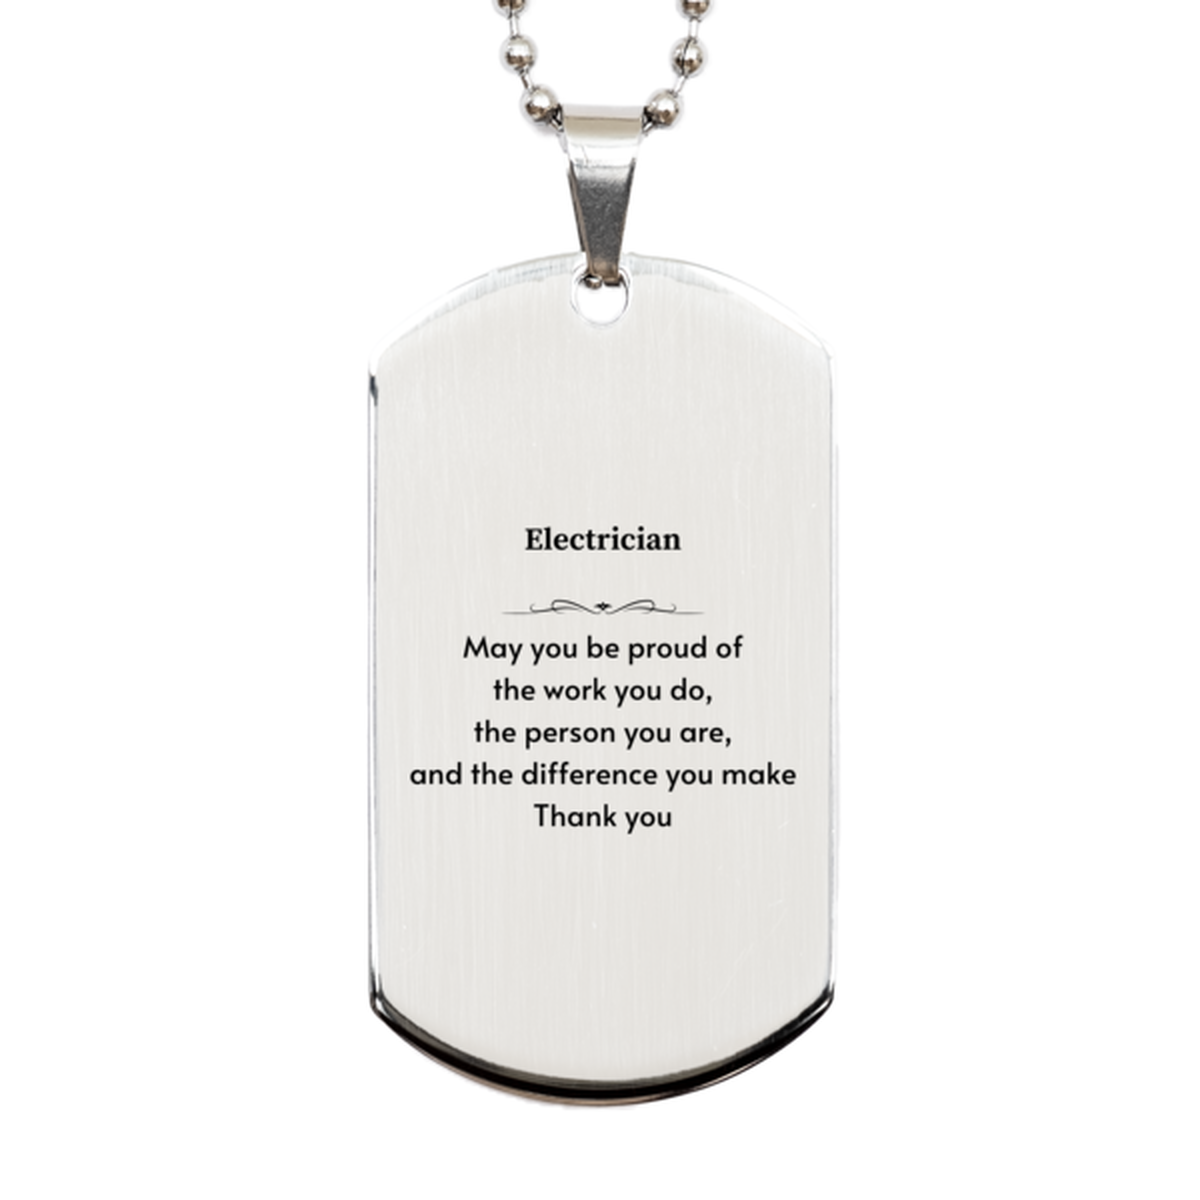 Heartwarming Silver Dog Tag Retirement Coworkers Gifts for Electrician, Electrician May You be proud of the work you do, the person you are Gifts for Boss Men Women Friends